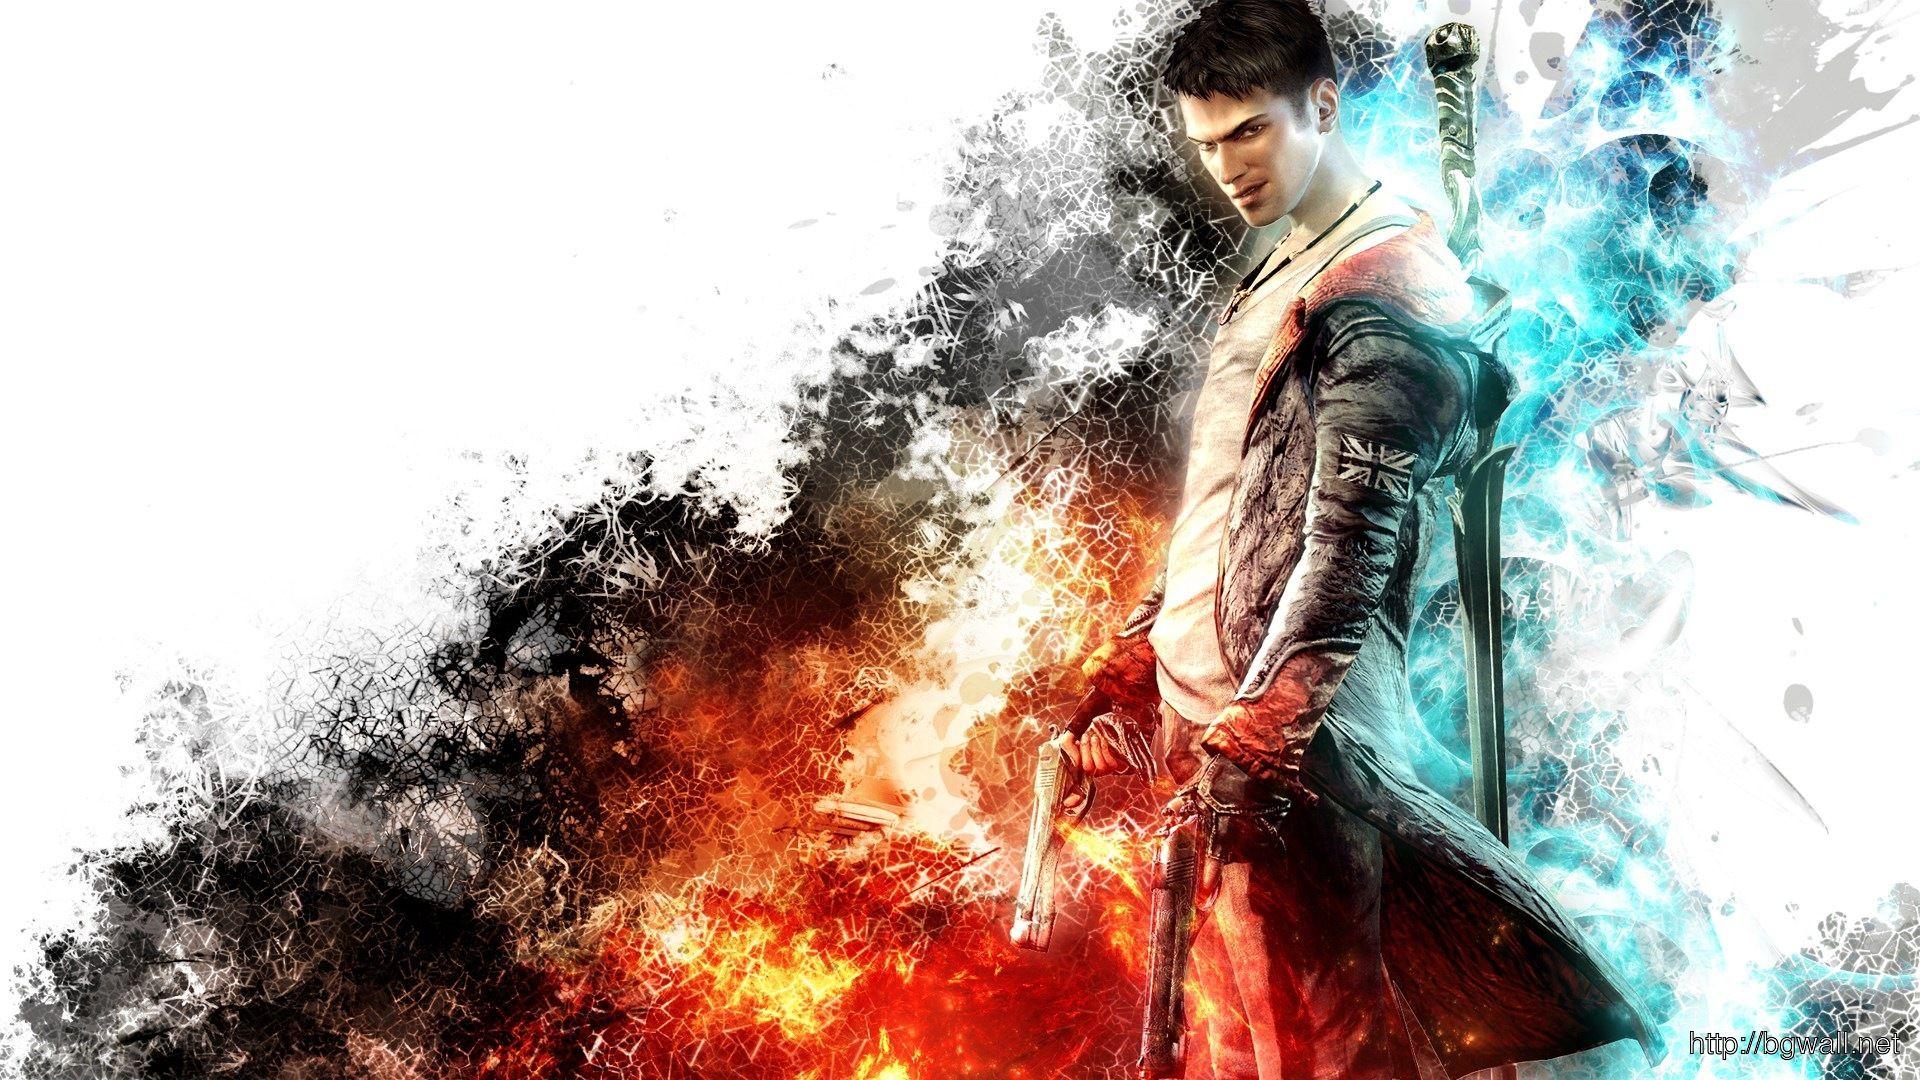 Dante Devil May Cry 5 Wallpapers Wallpaper Cave